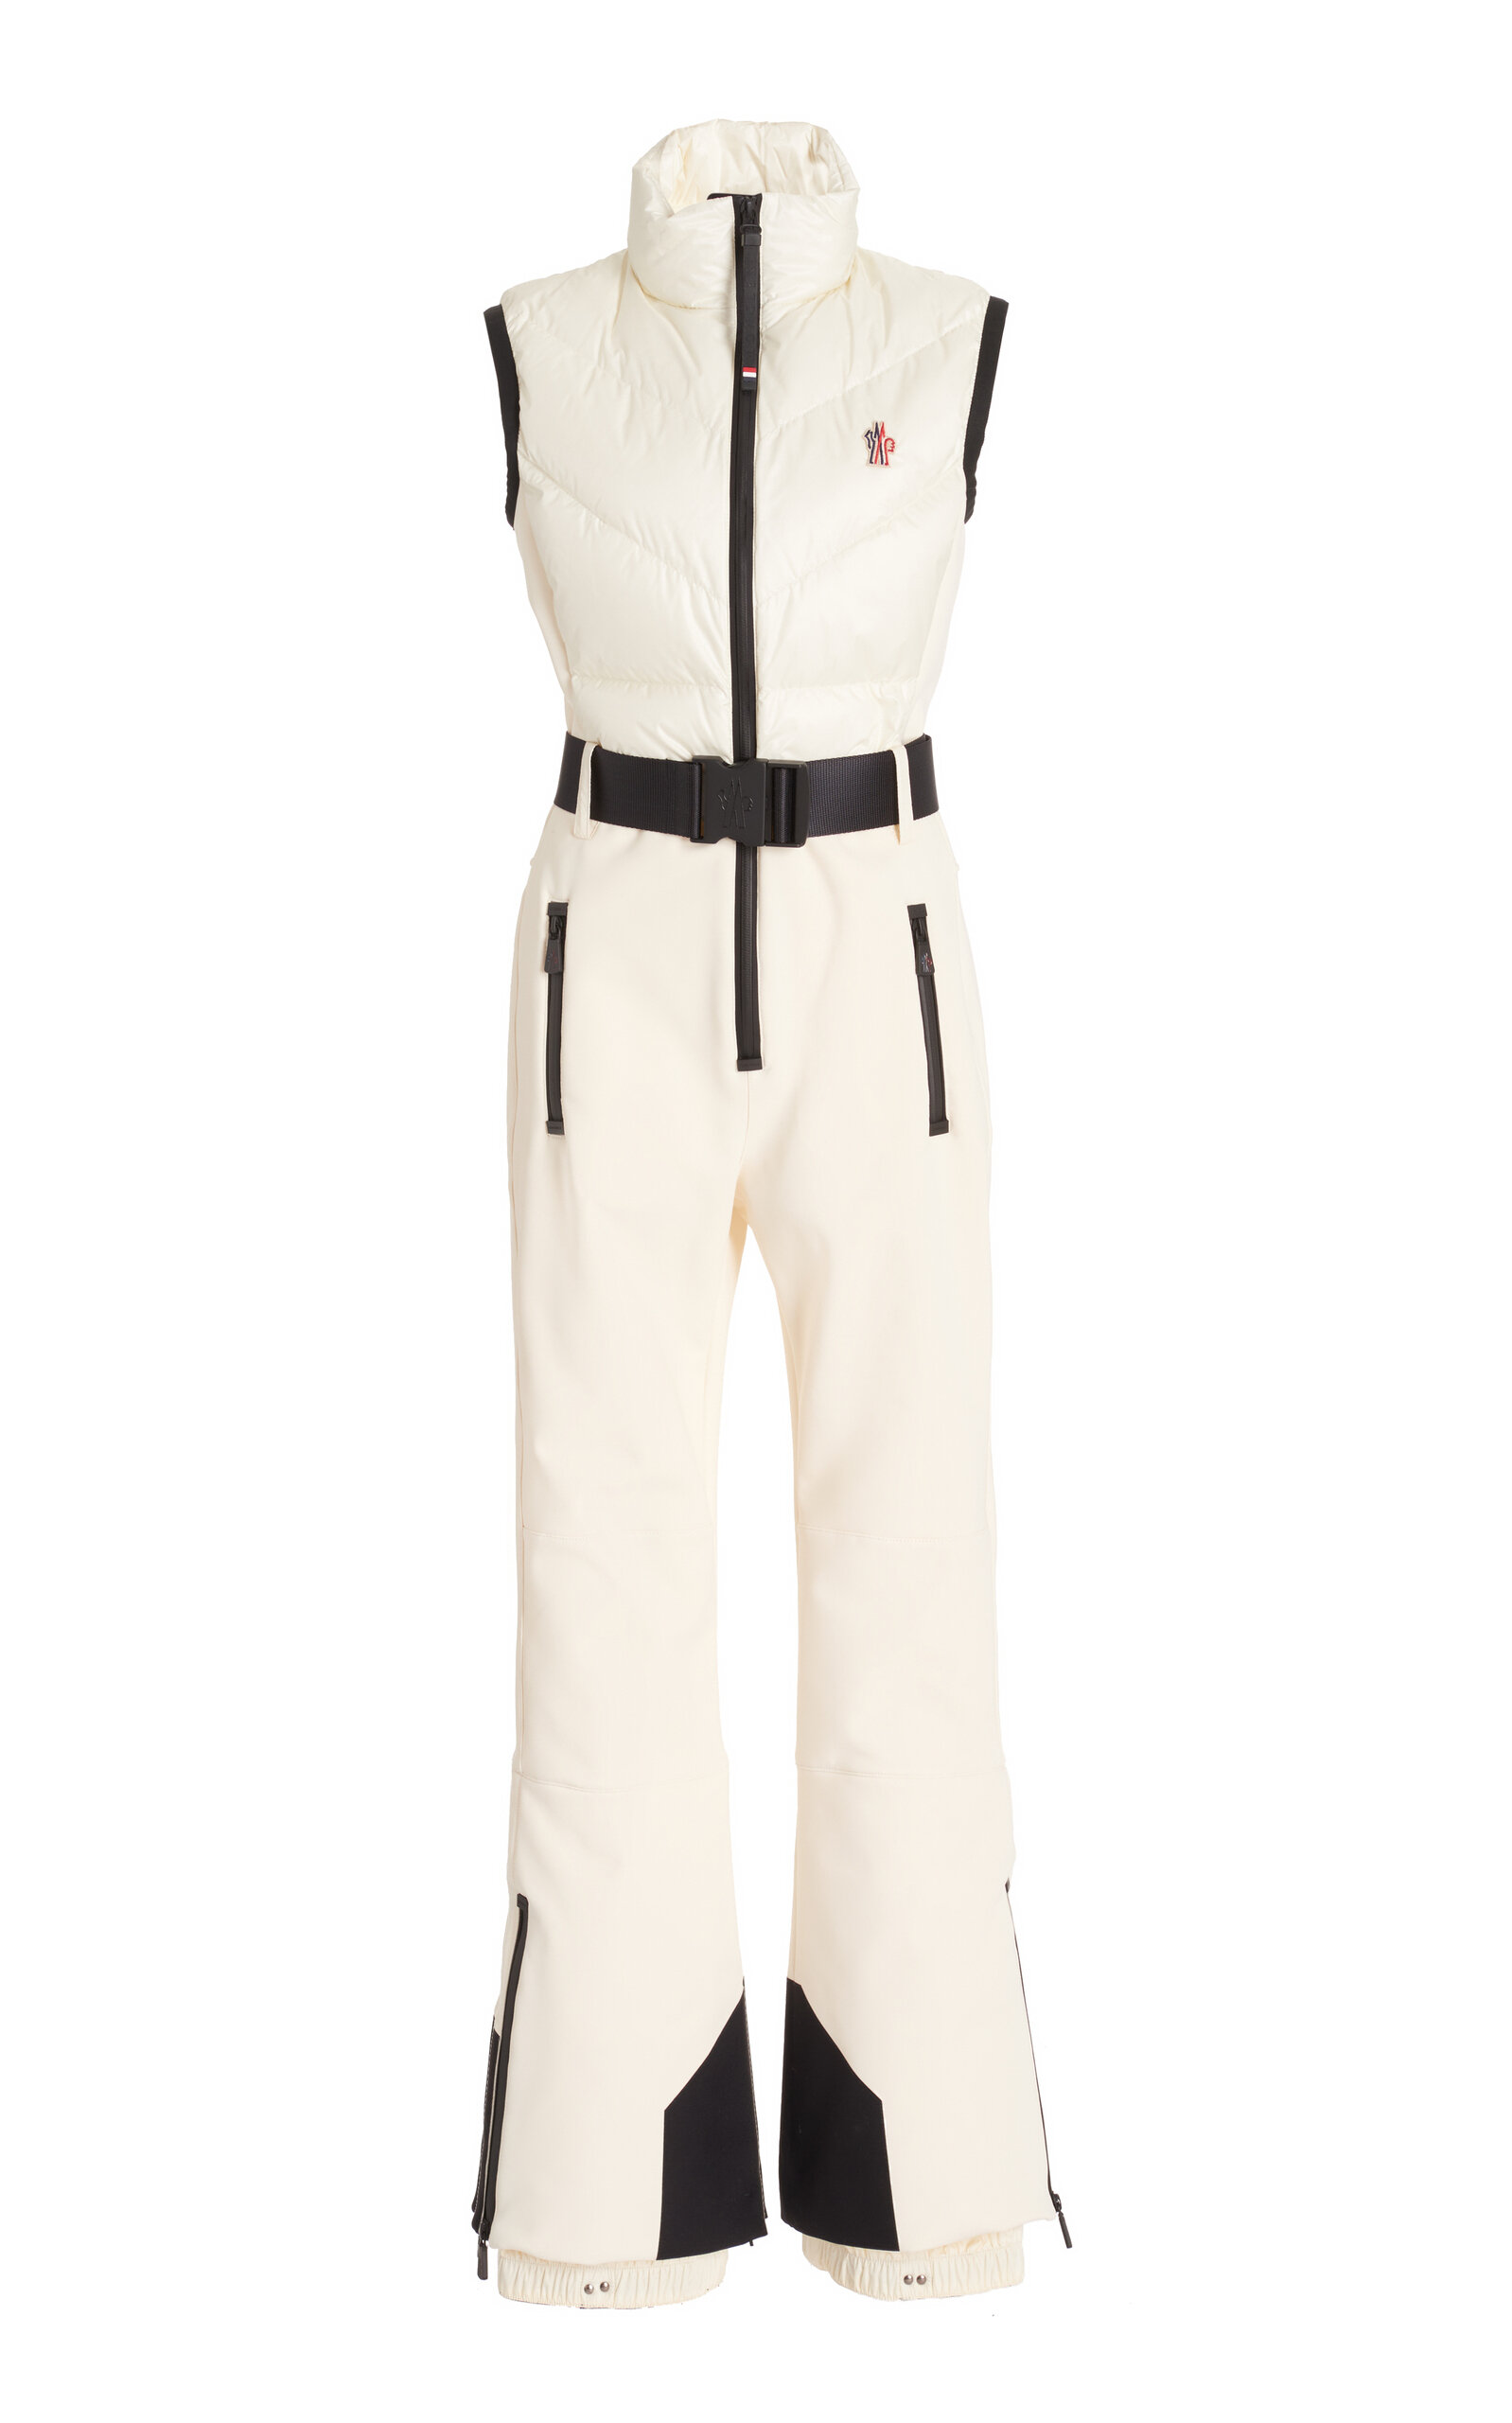 Moncler Grenoble Ski suit with a patch, Women's Clothing